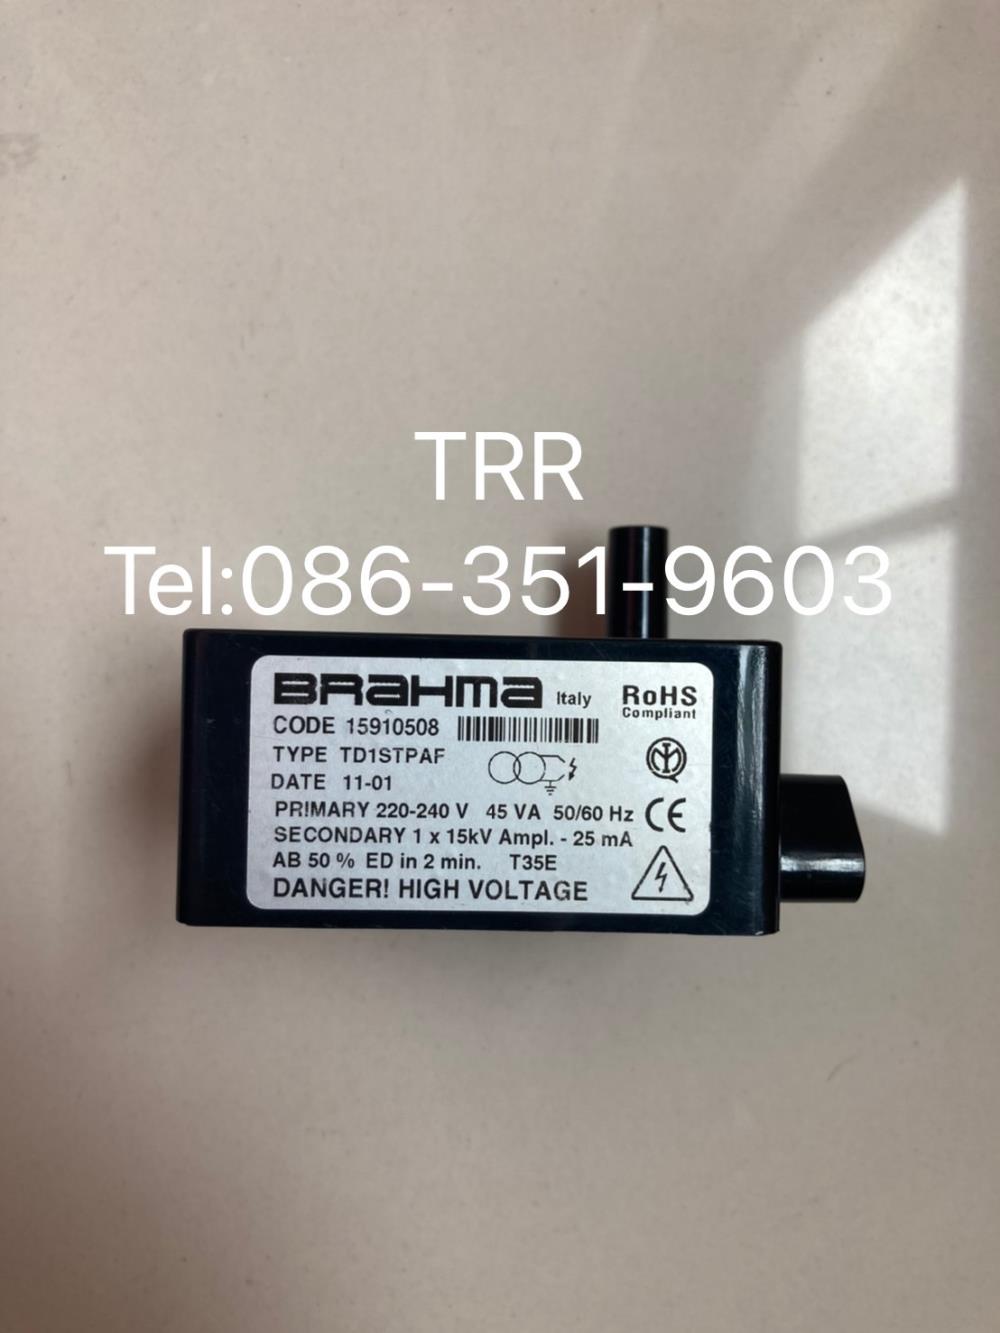 Brahma TD1STPAF,Brahma TD1STPAF,Brahma TD1STPAF,Electrical and Power Generation/Transformers